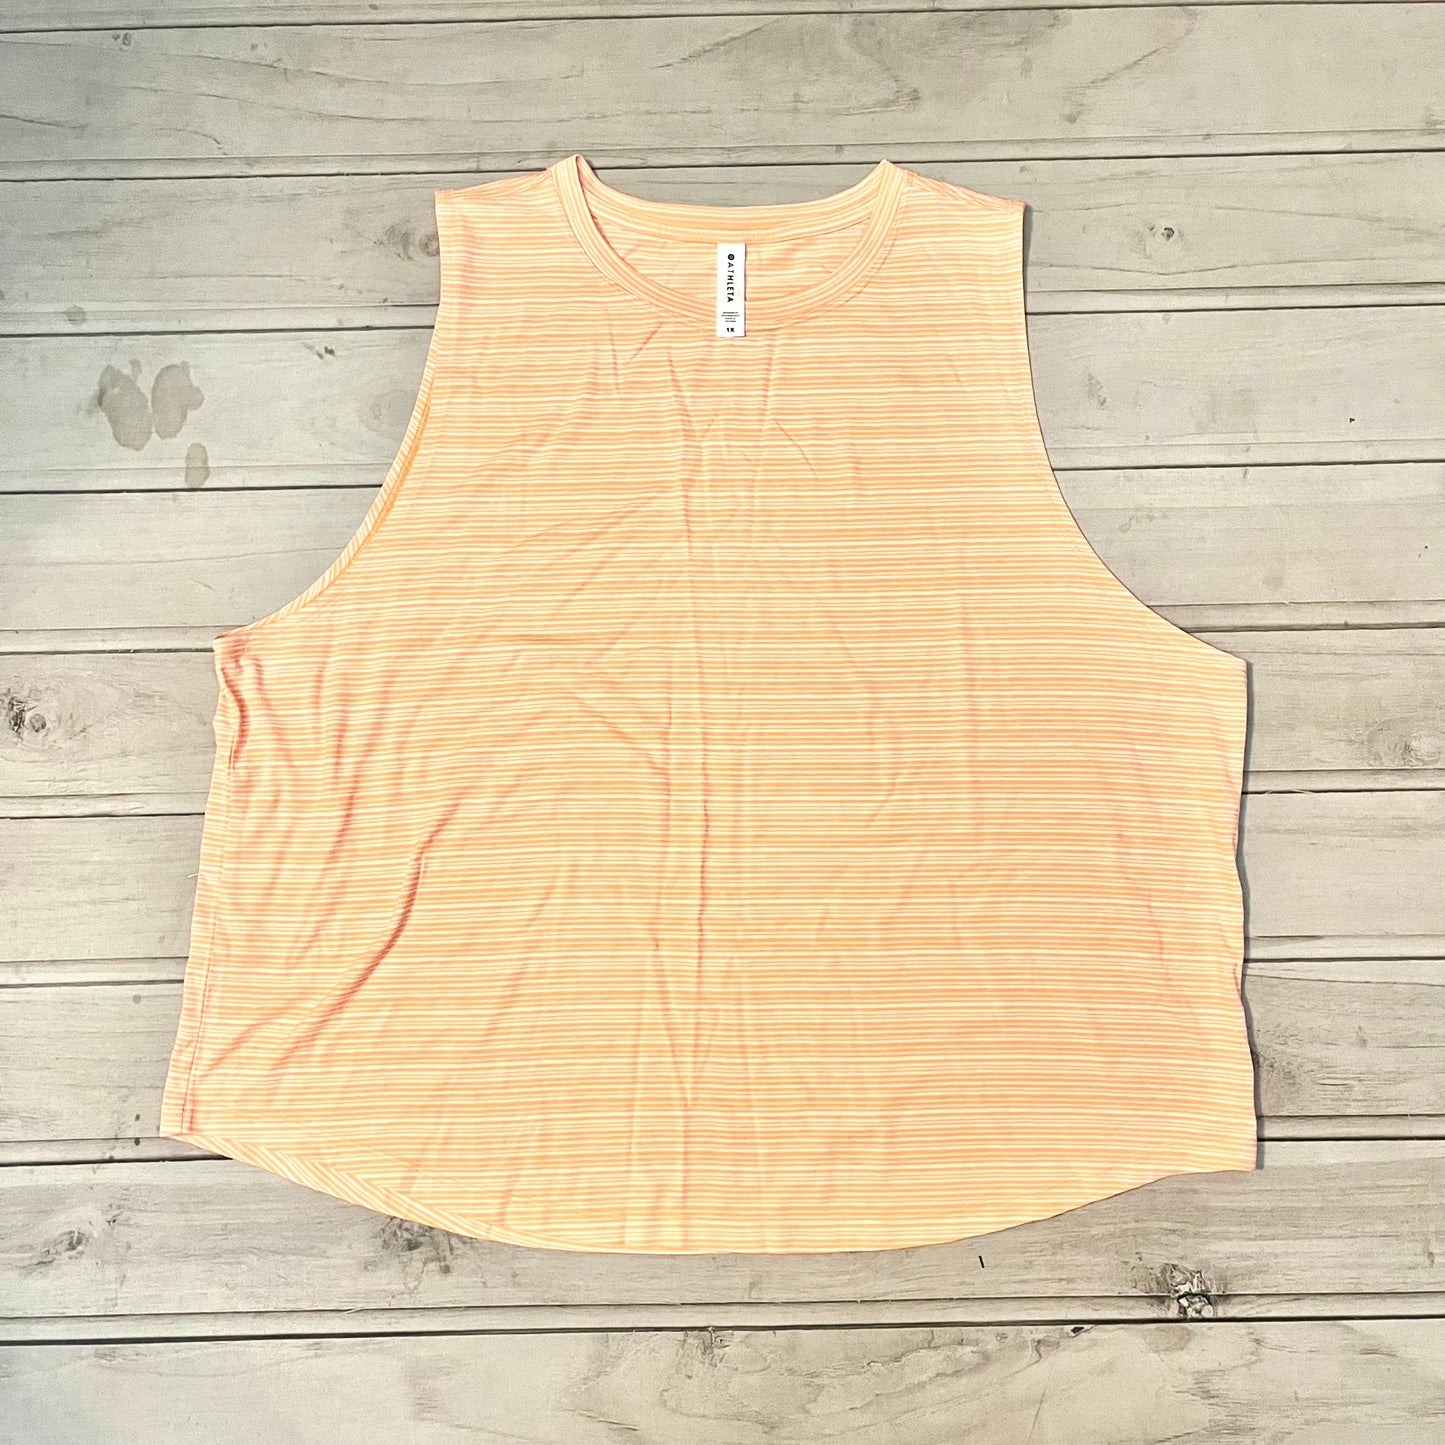 Athletic Tank Top By Athleta  Size: 1x